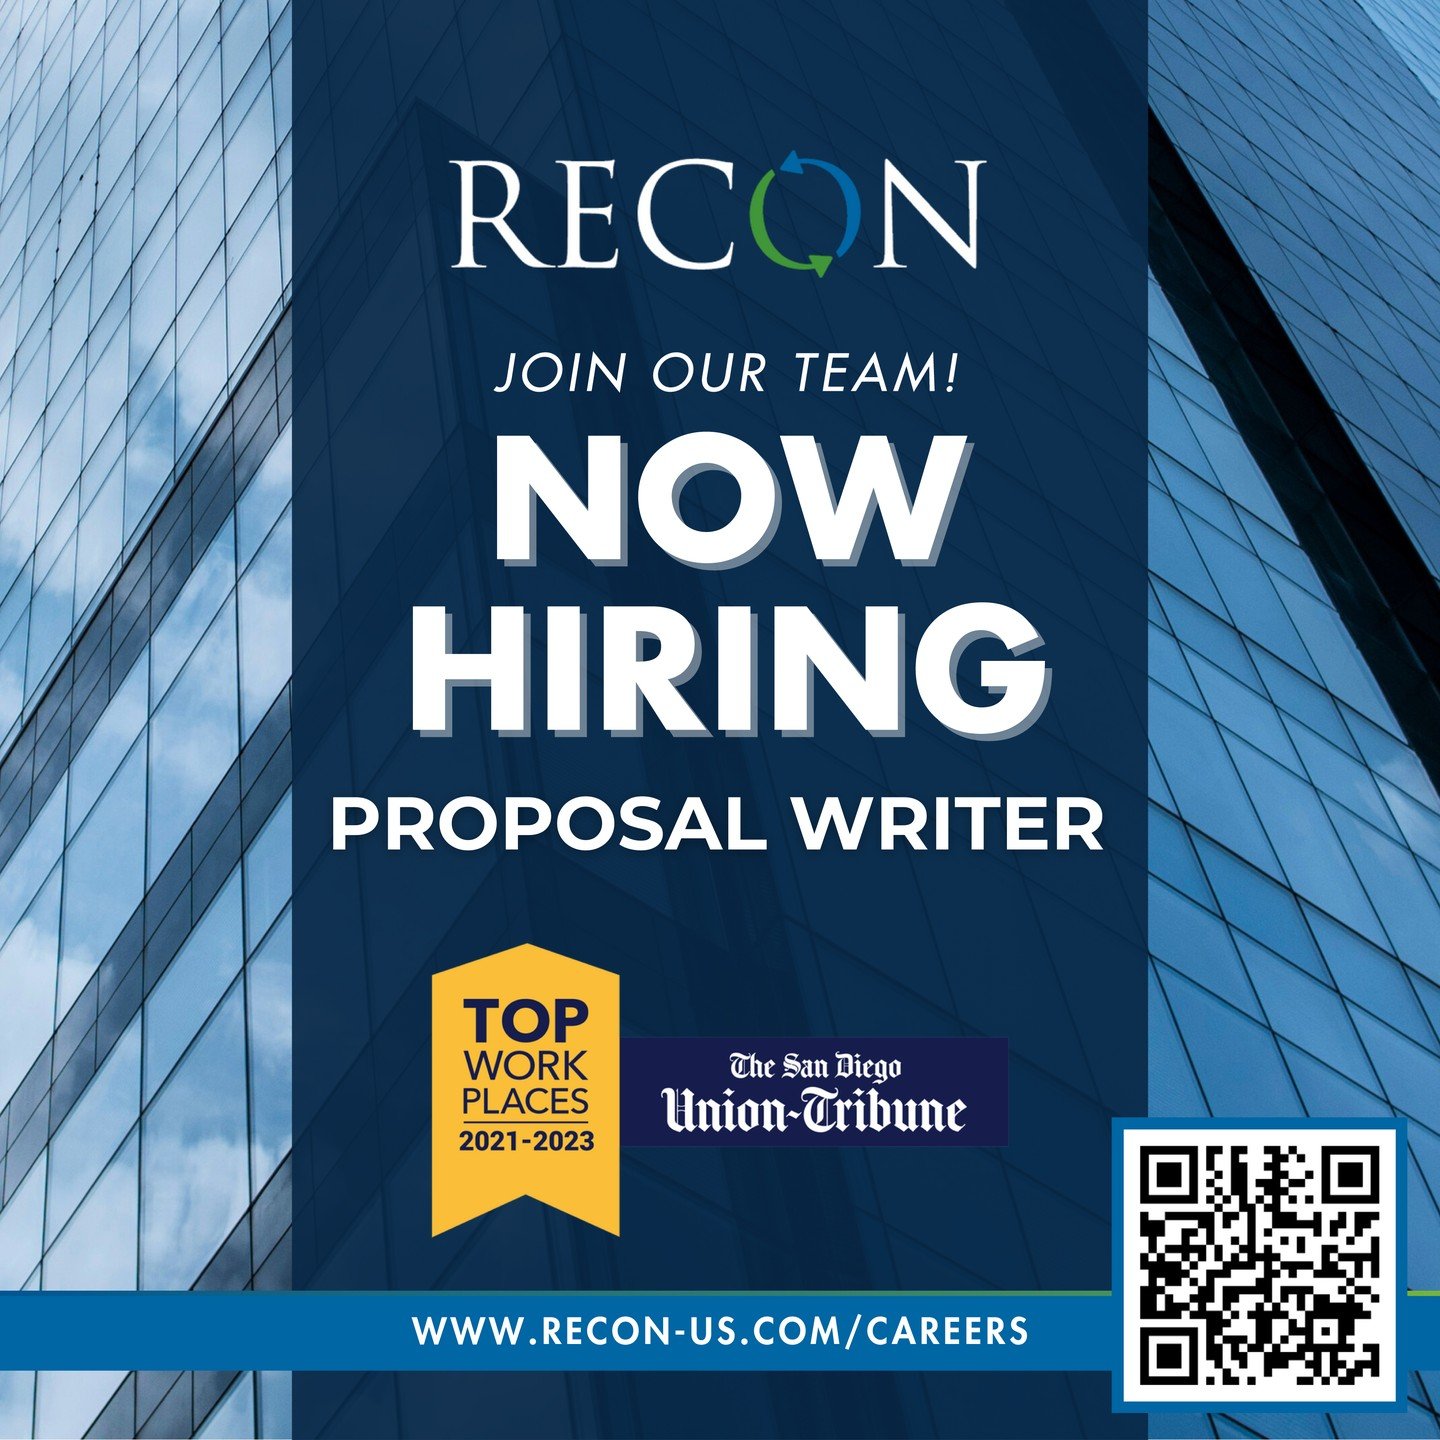 Join our team as a Proposal Writer! Check out our website for more information. #sandiegojobs #proposals #grants #writer